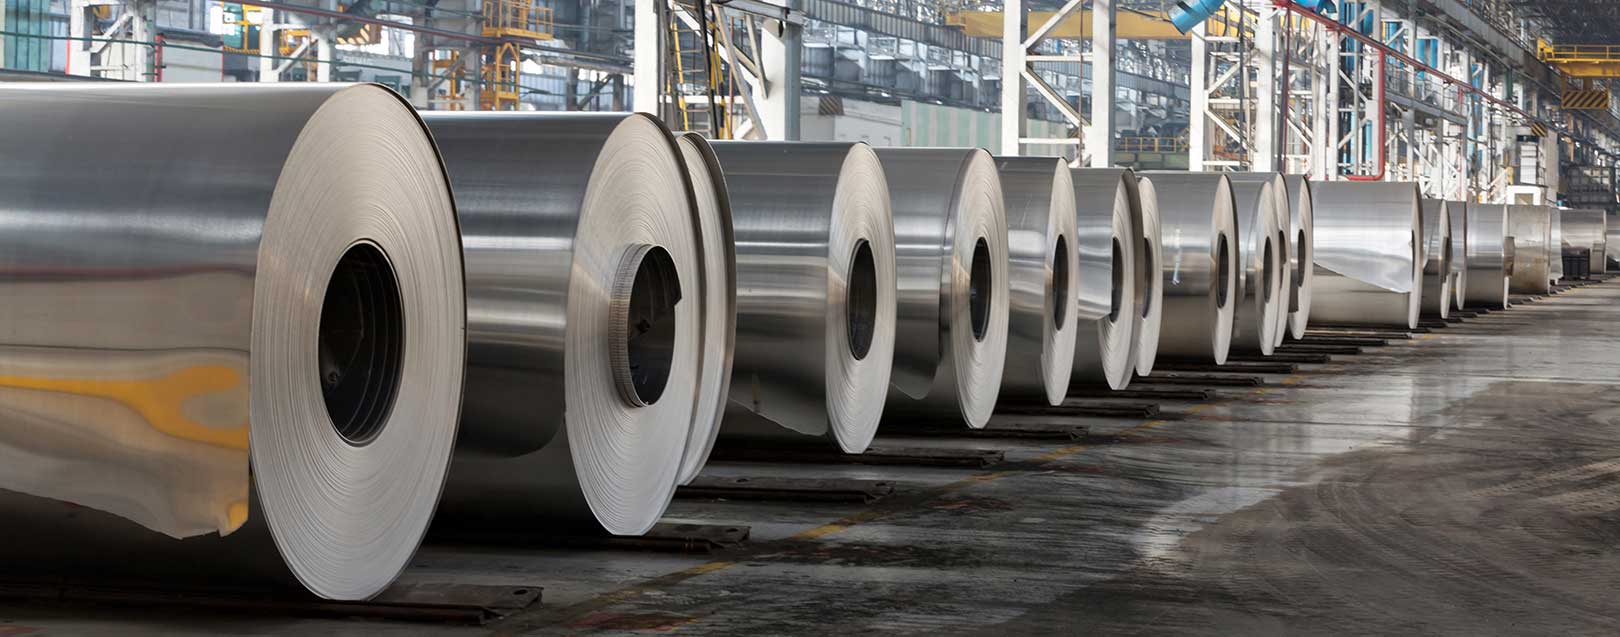 India has become a net exporter of steel: Steel Minister